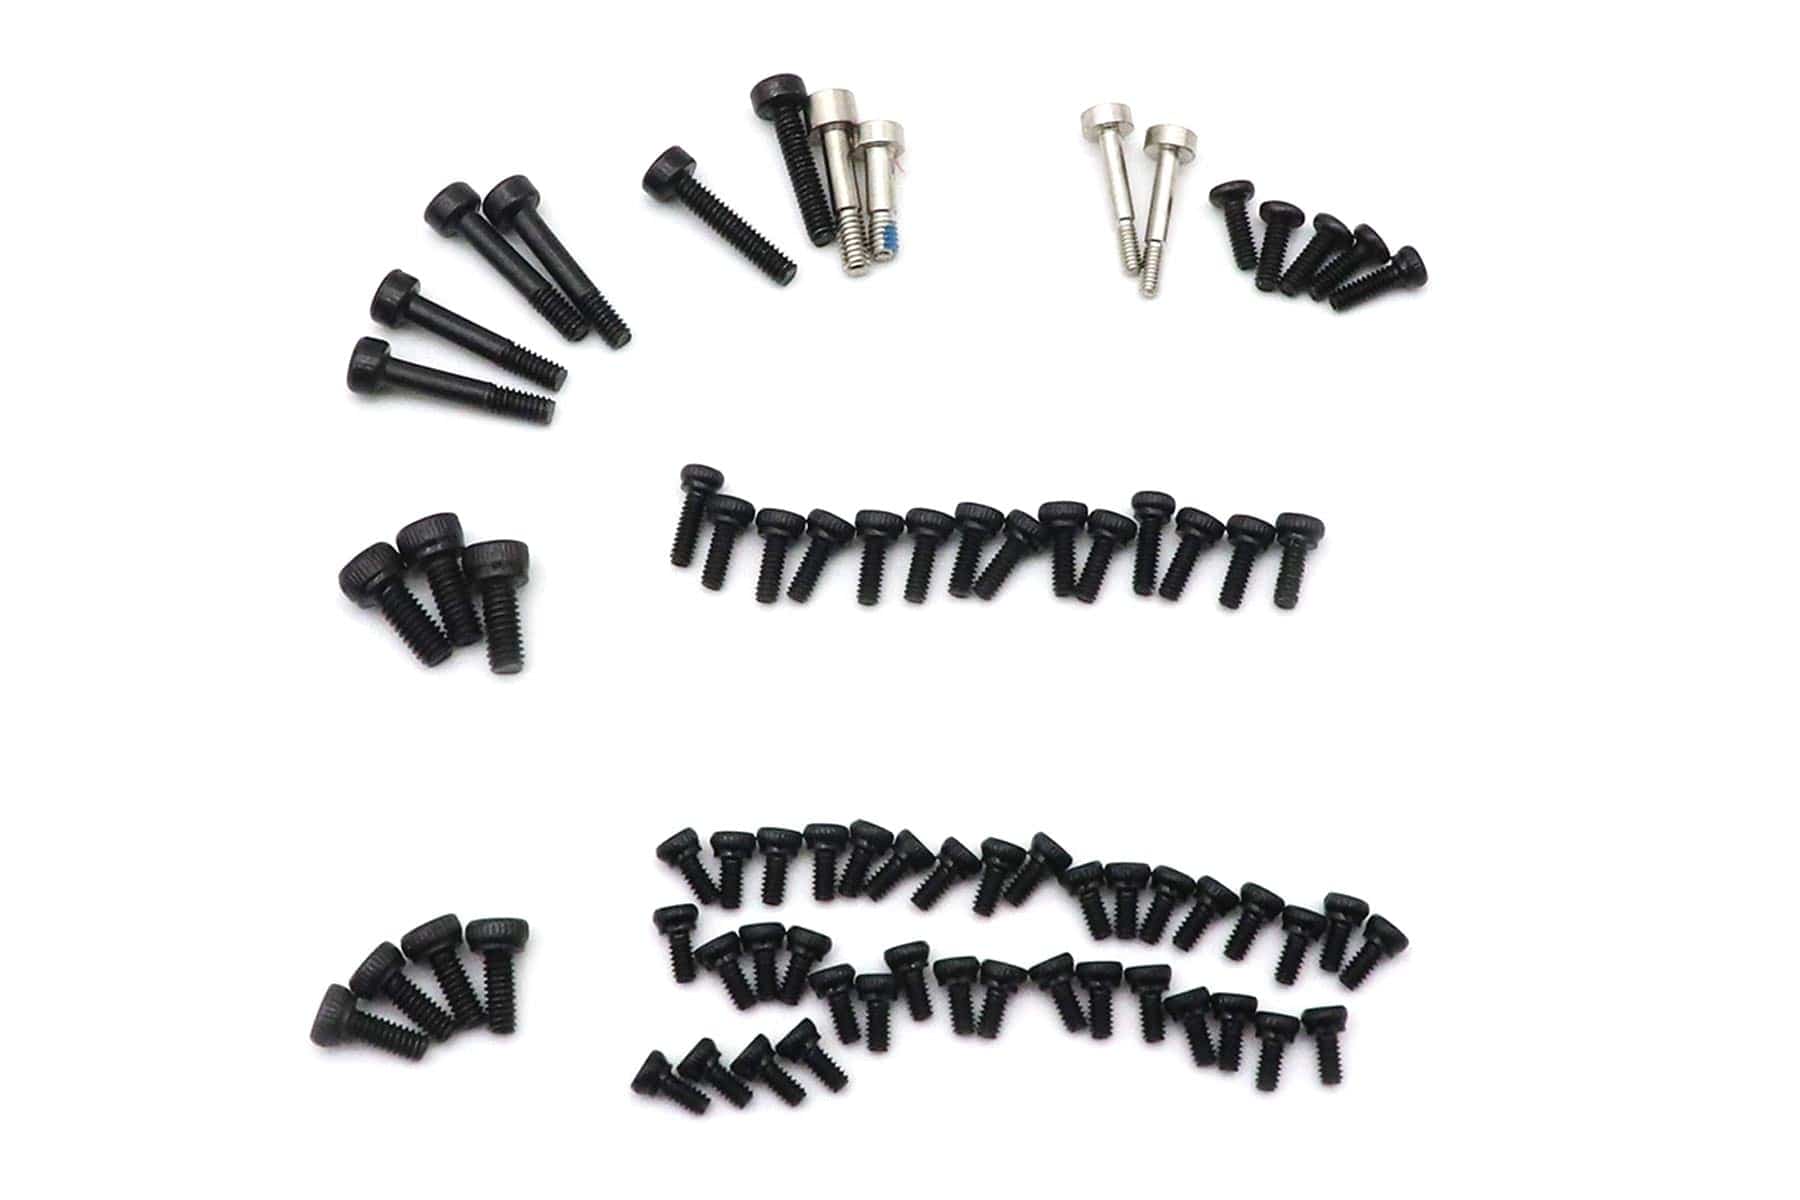 RotorScale 400 Size F180 Helicopter Screw Set RSH1004-035